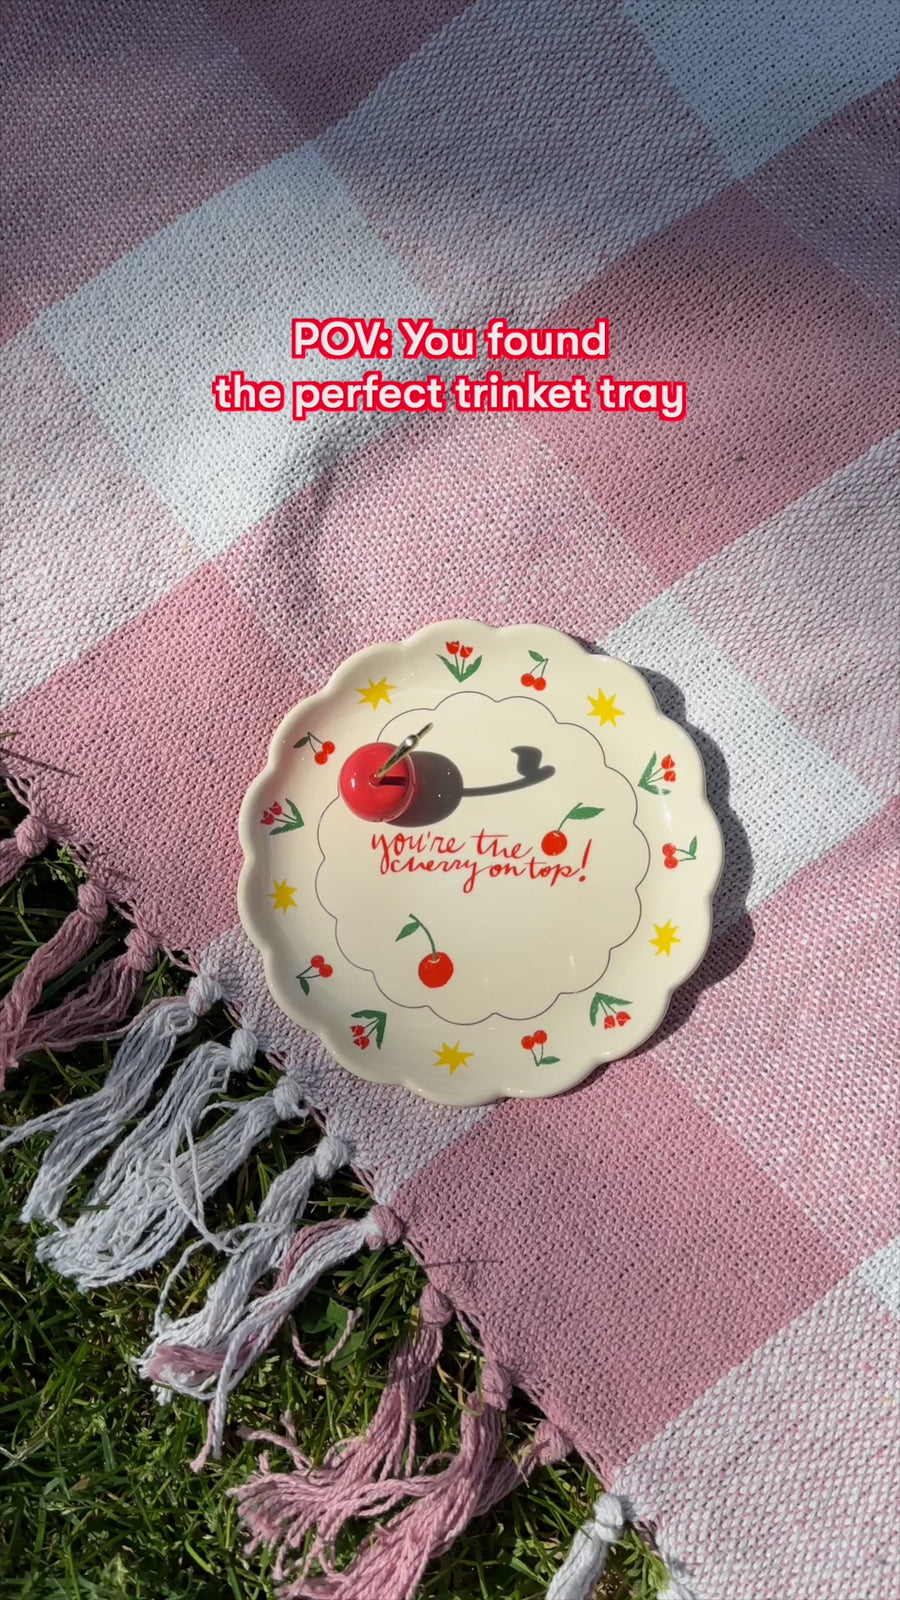 model showcasing 'you're the cherry on top' trinket tray with 3D cherry ring holder